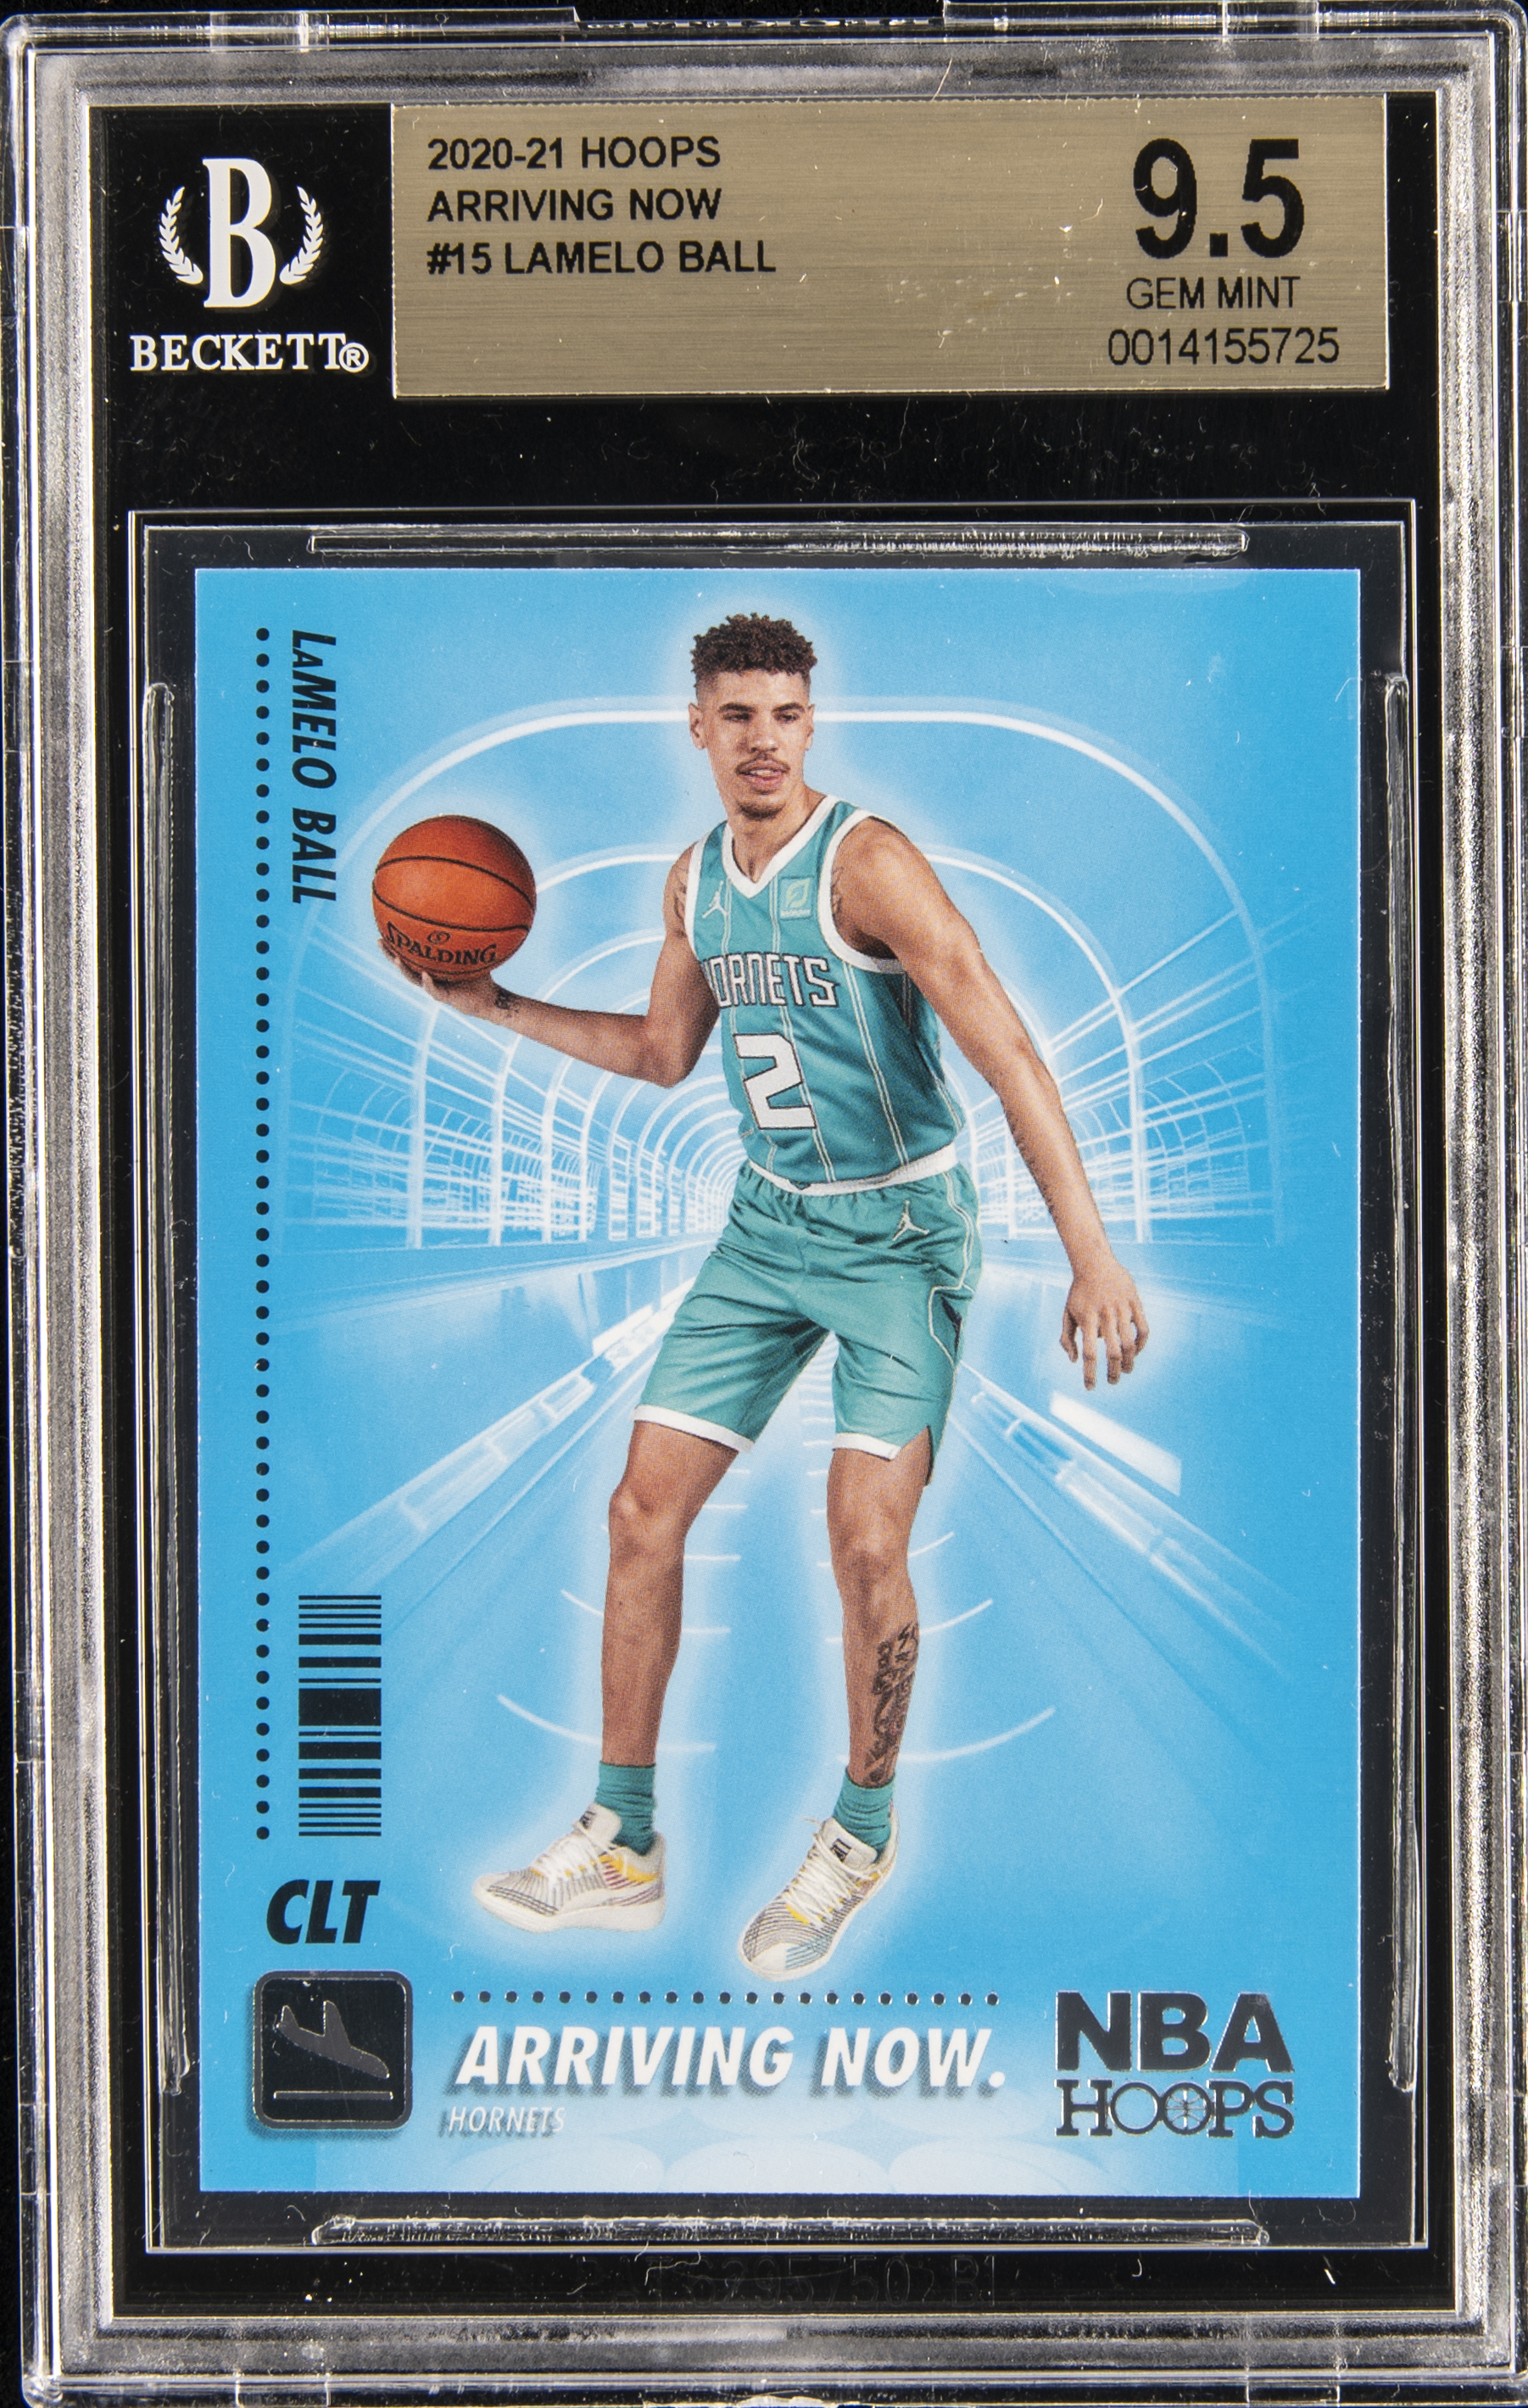 2020-21 Panini Hoops Arriving Now #15 LaMelo Ball Rookie Card – BGS GEM MINT 9.5